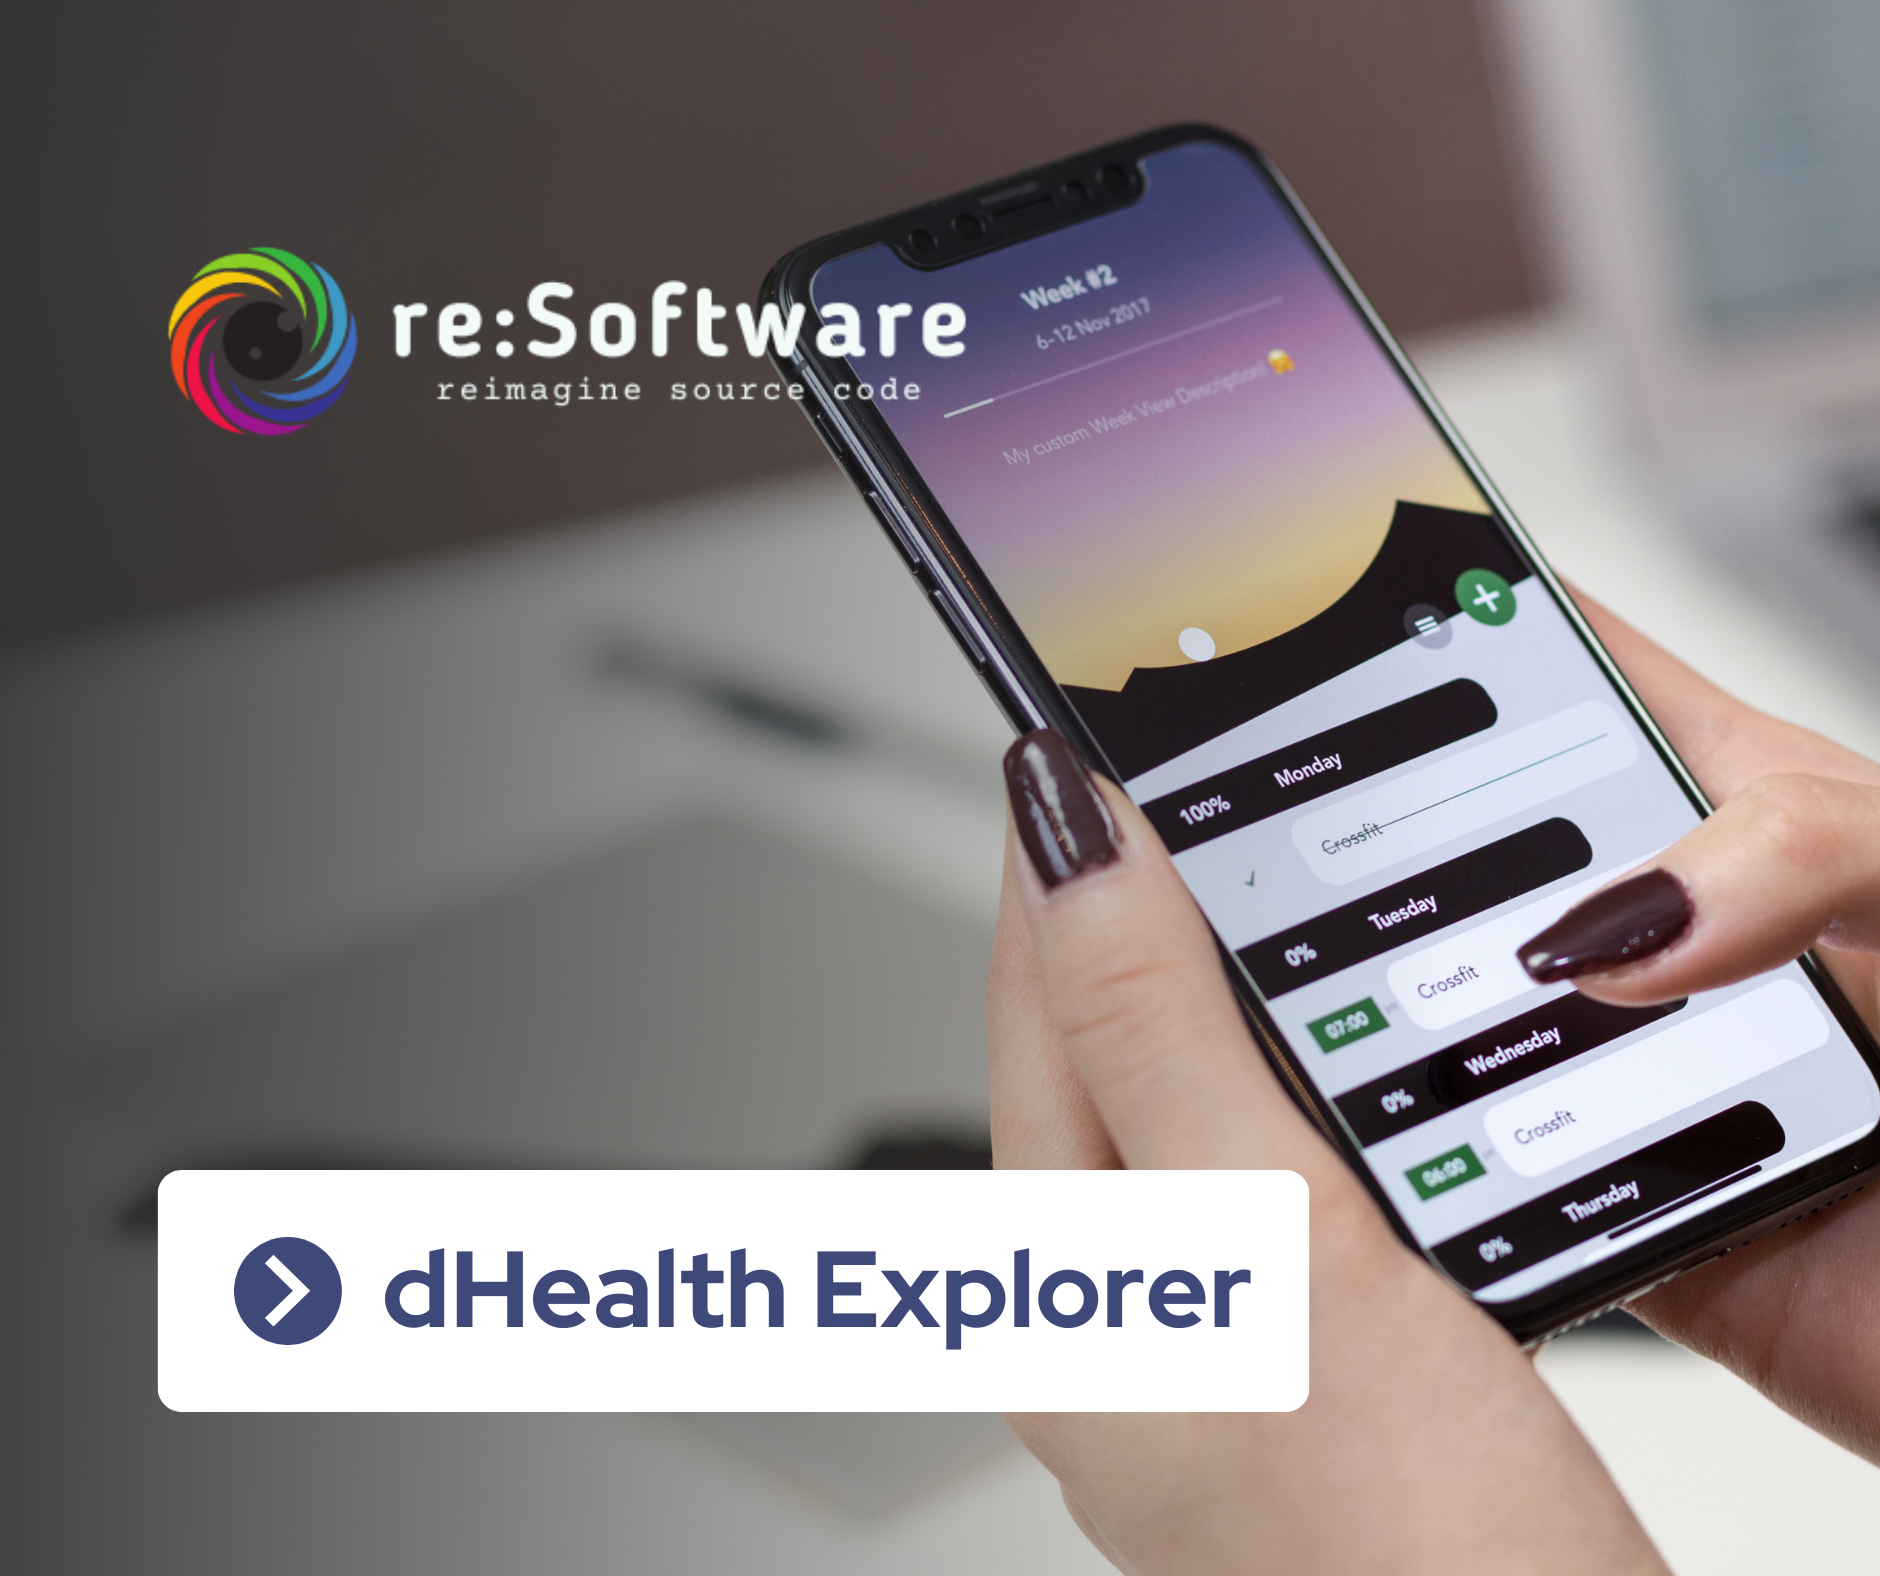 dHealth Explorer by re:Software S.L.